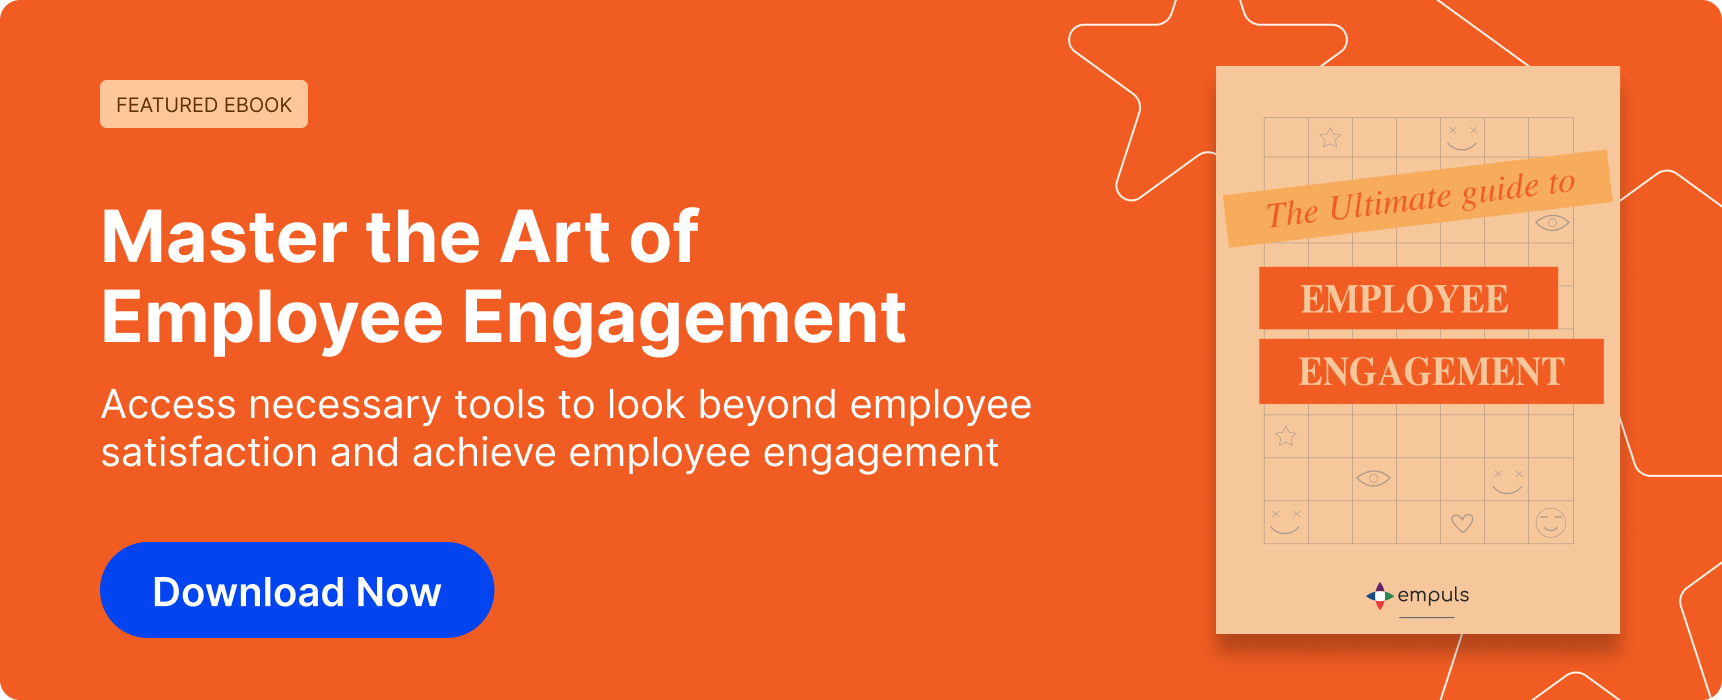 Guide to employee engagement